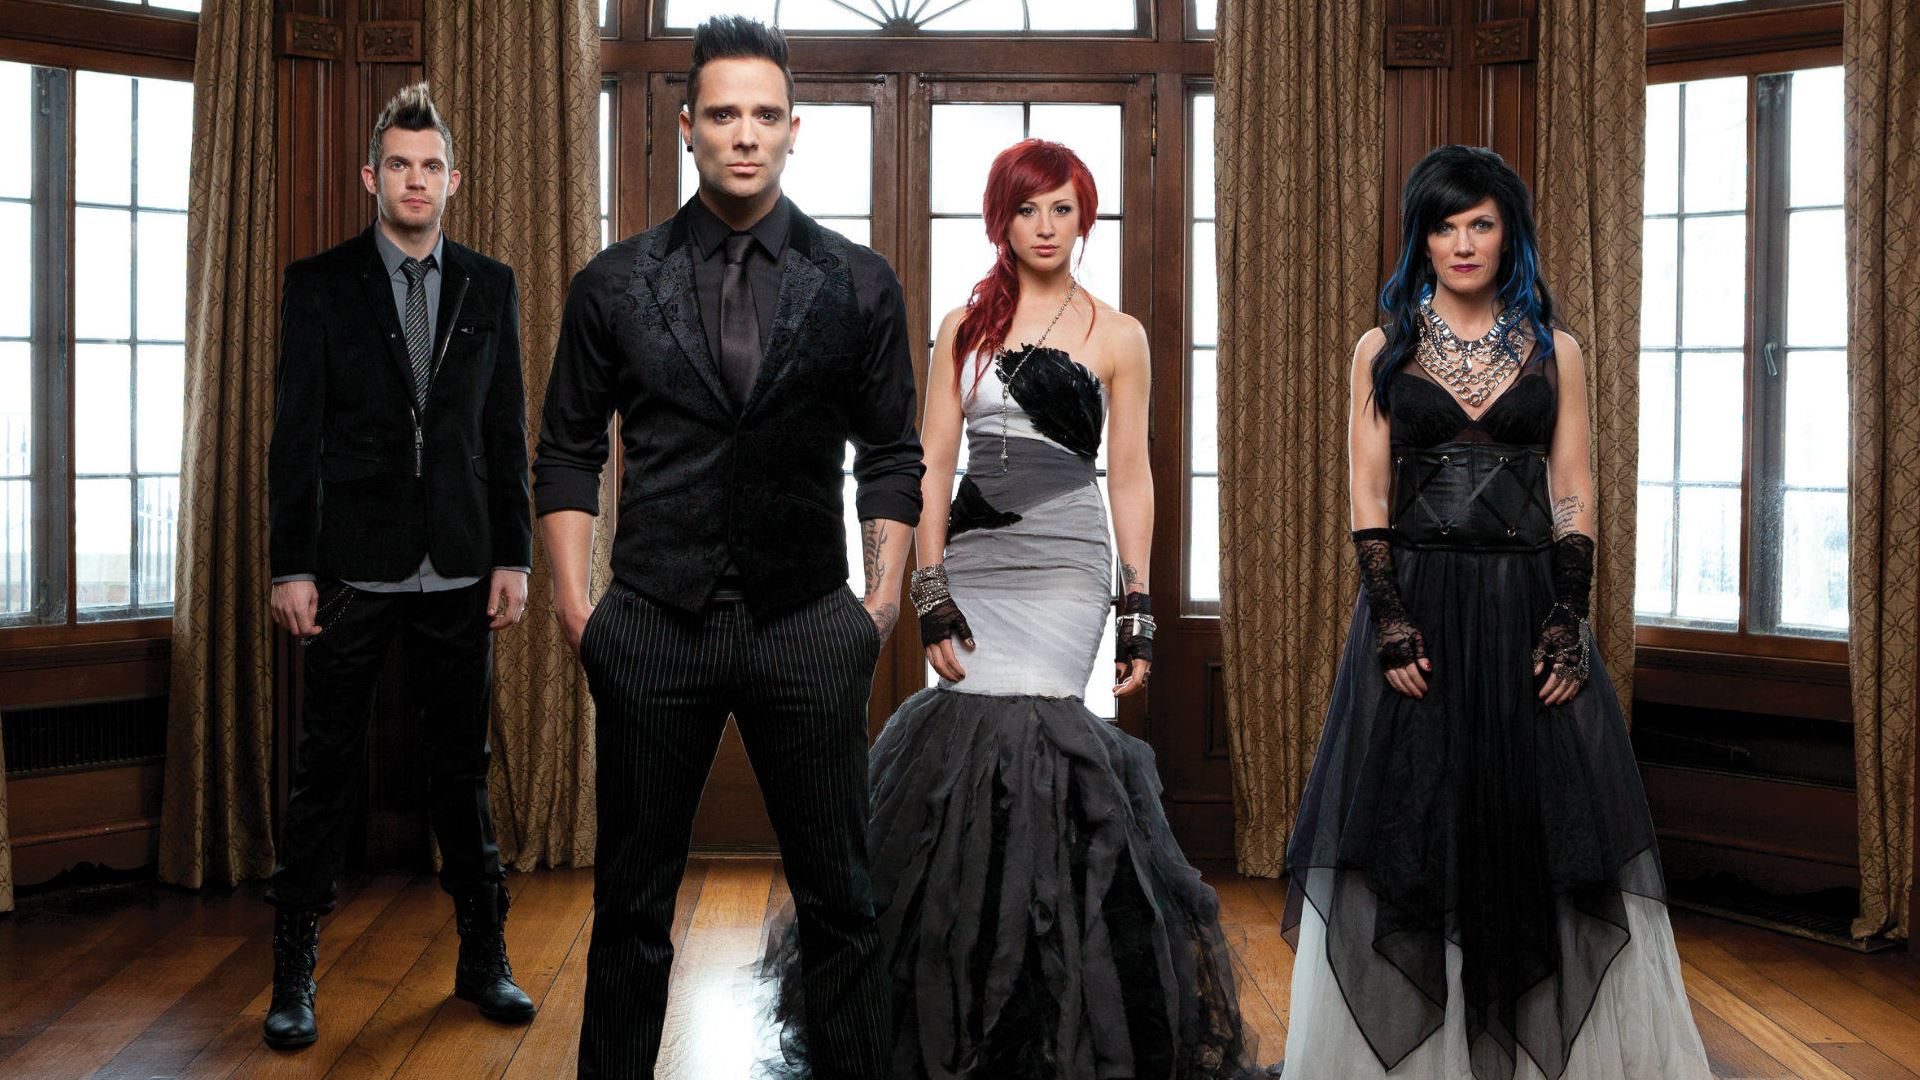 Skillet Rise Wallpaper Pictures